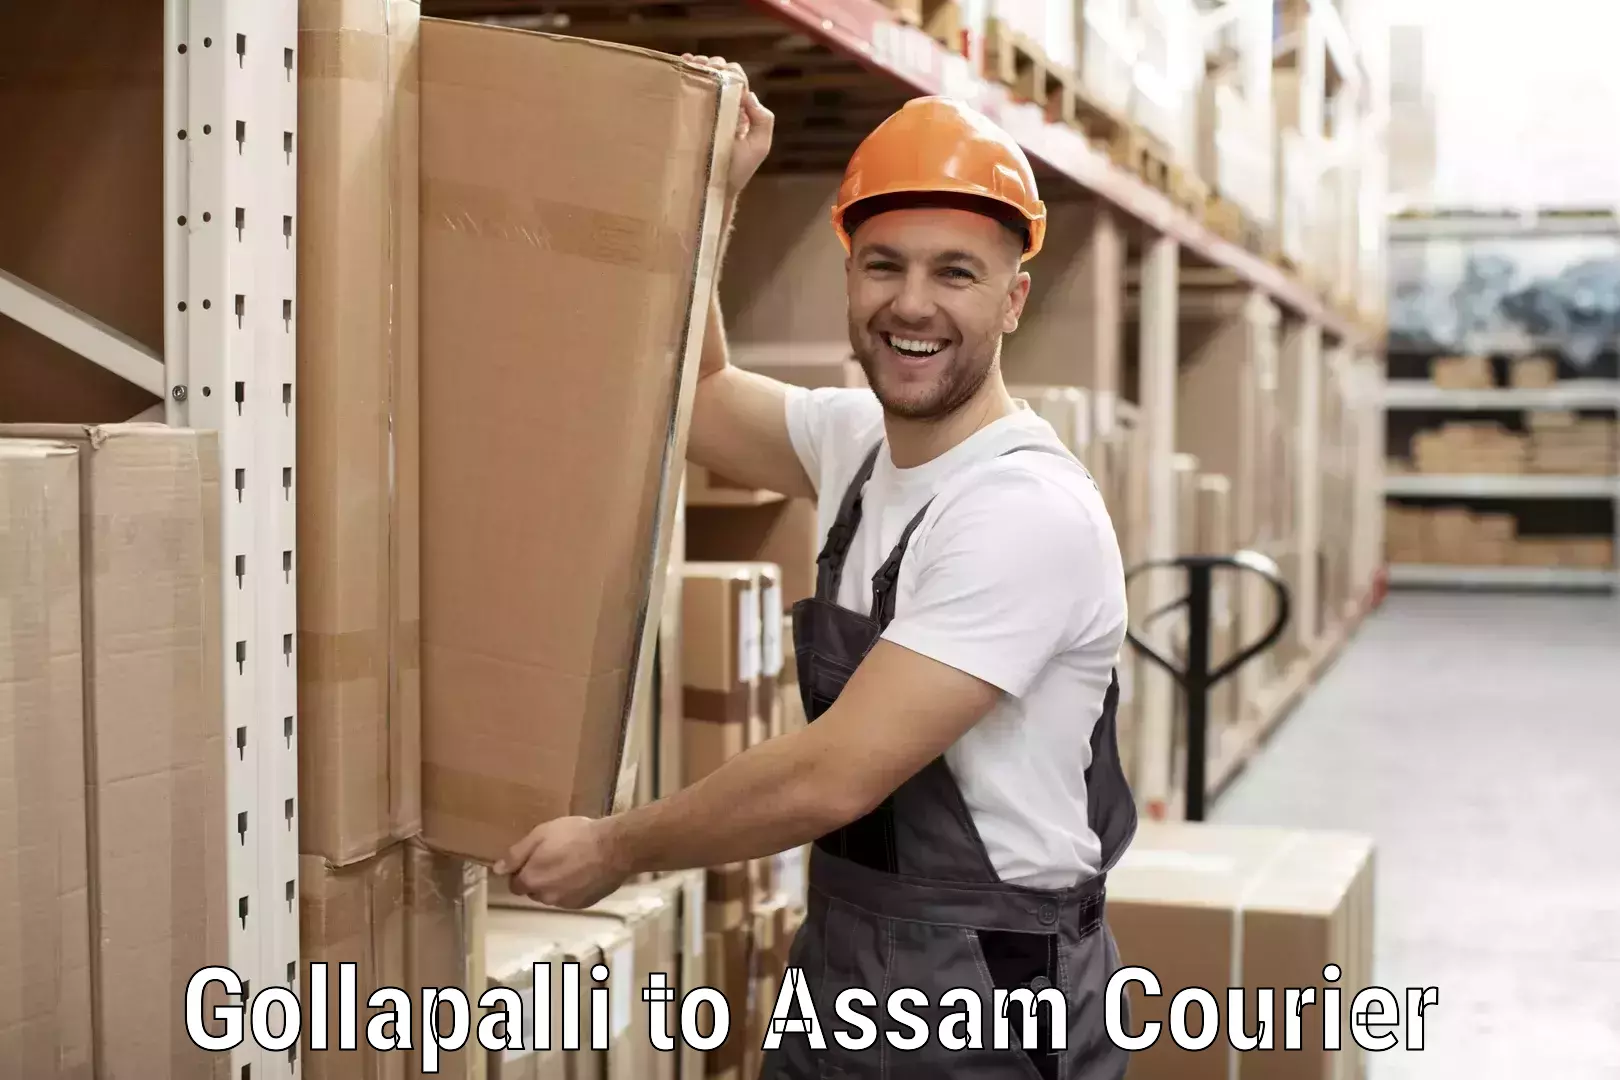 Efficient parcel delivery Gollapalli to Guwahati